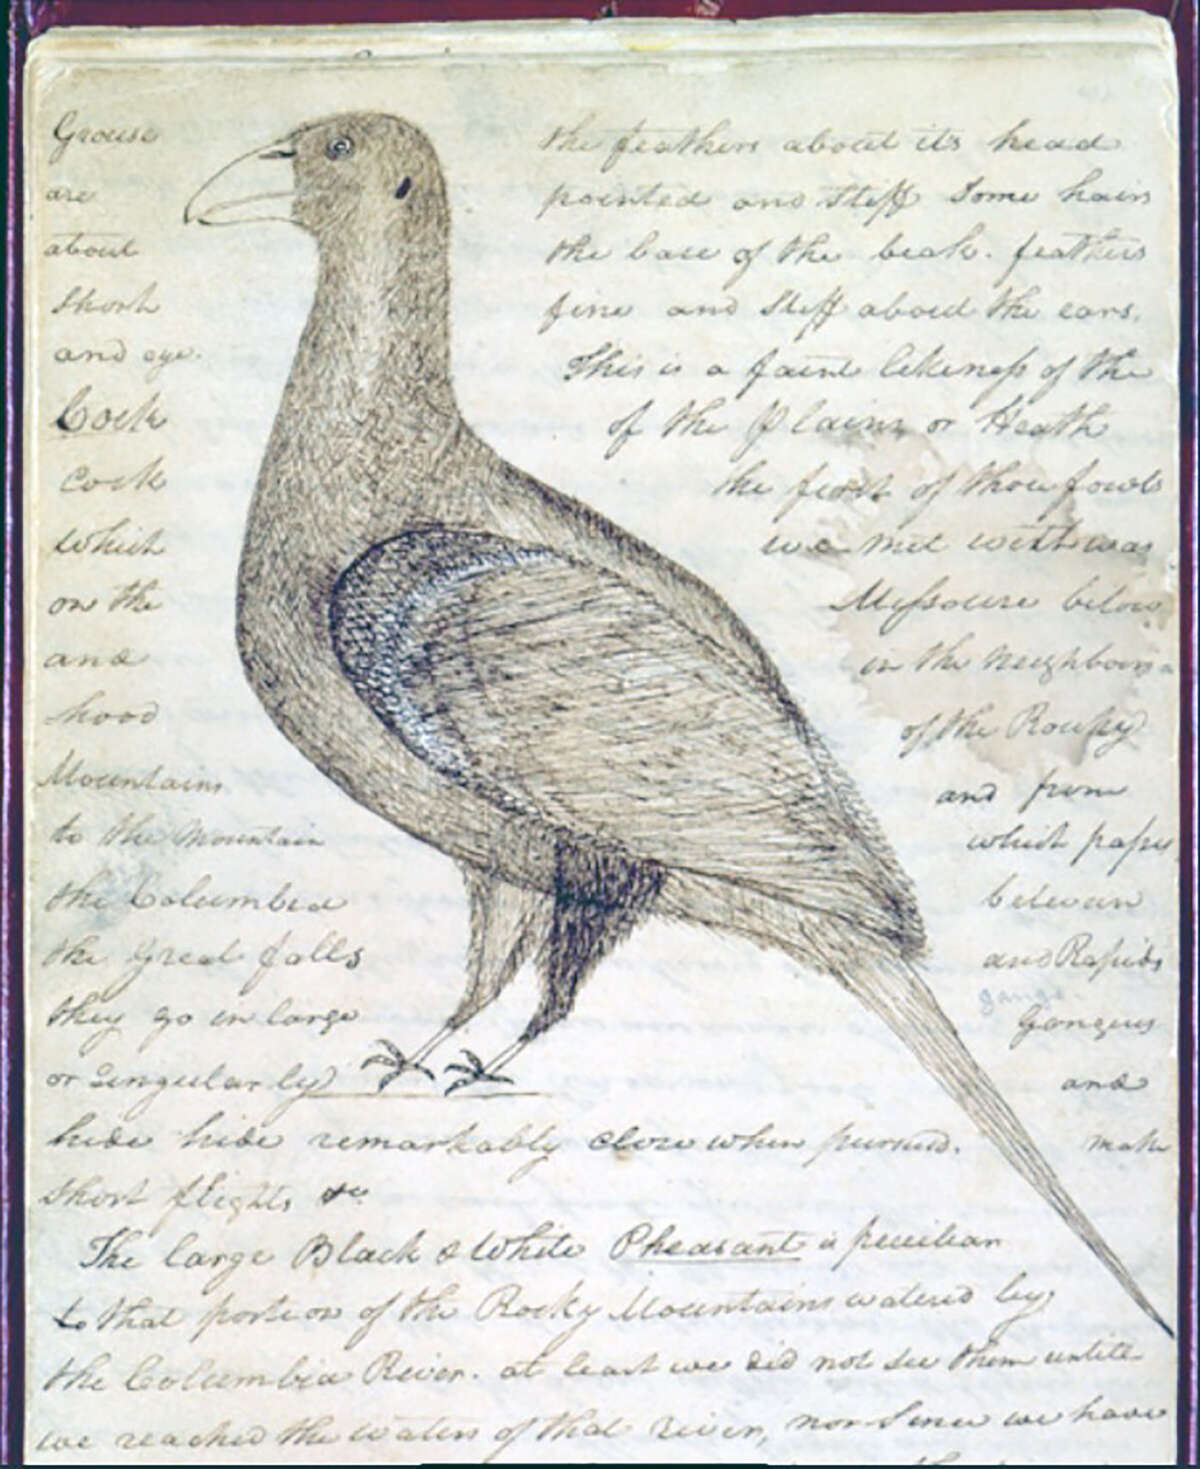 A sketch of a bird drawn by William Clark during the Lewis & Clark Expedition includes details that make the bird 